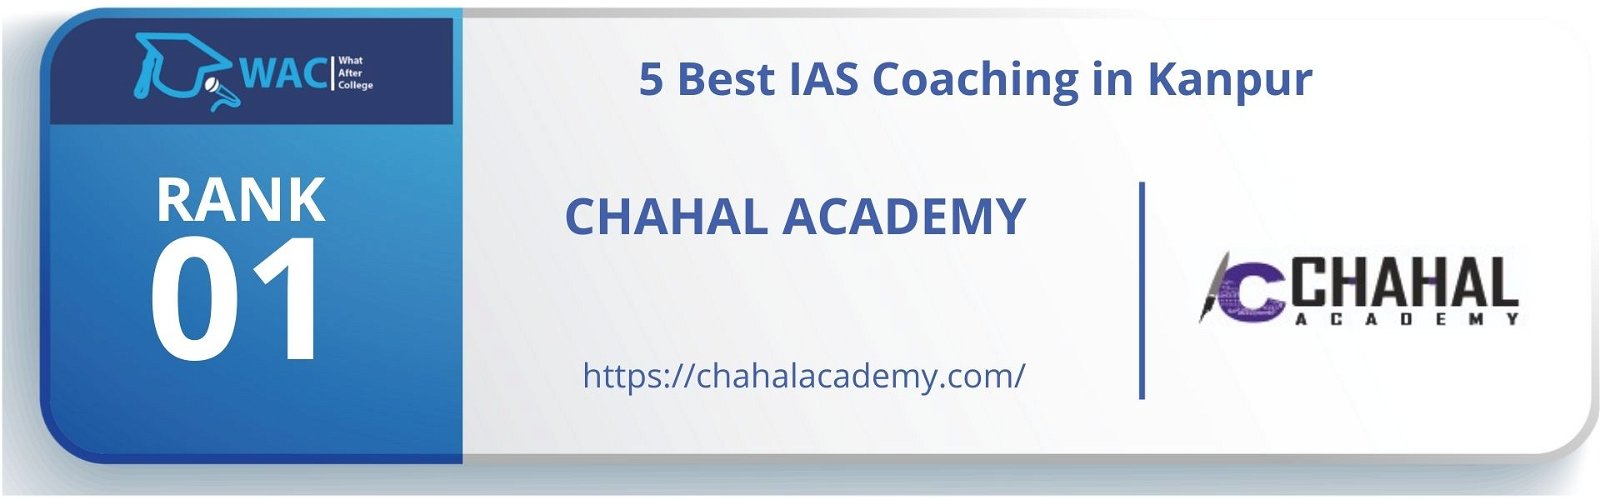 5 Best IAS Coaching in Kanpur Rank 1: Chahal Academy in Kanpur